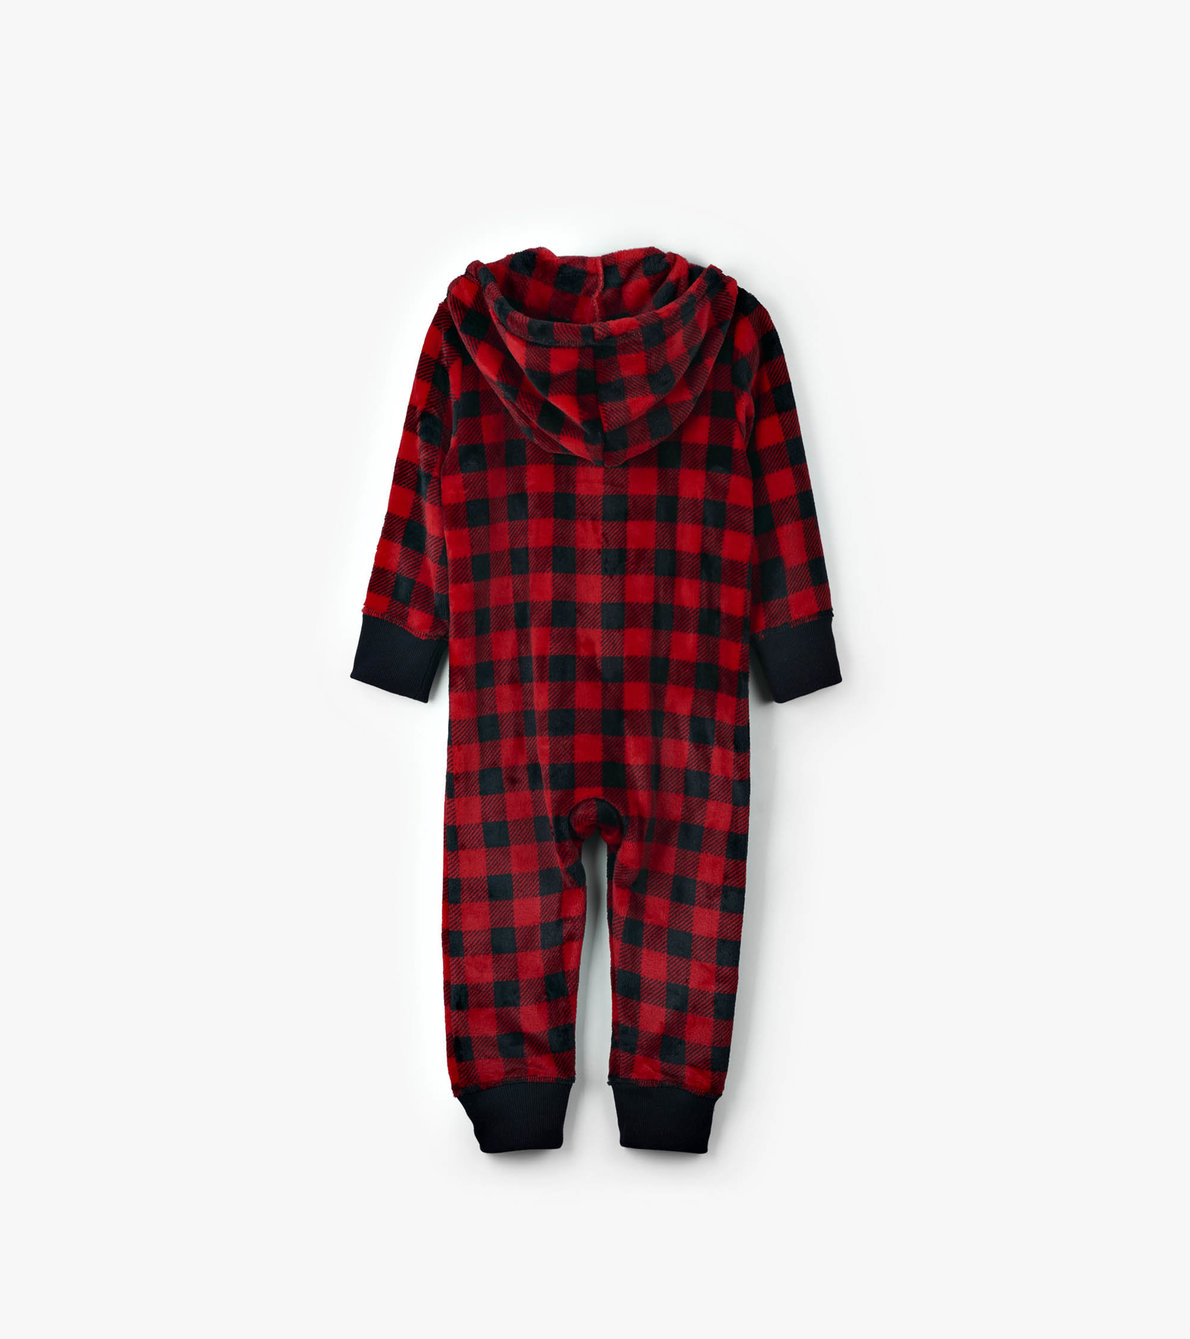 View larger image of Kids Buffalo Plaid Hooded Fleece Jumpsuit